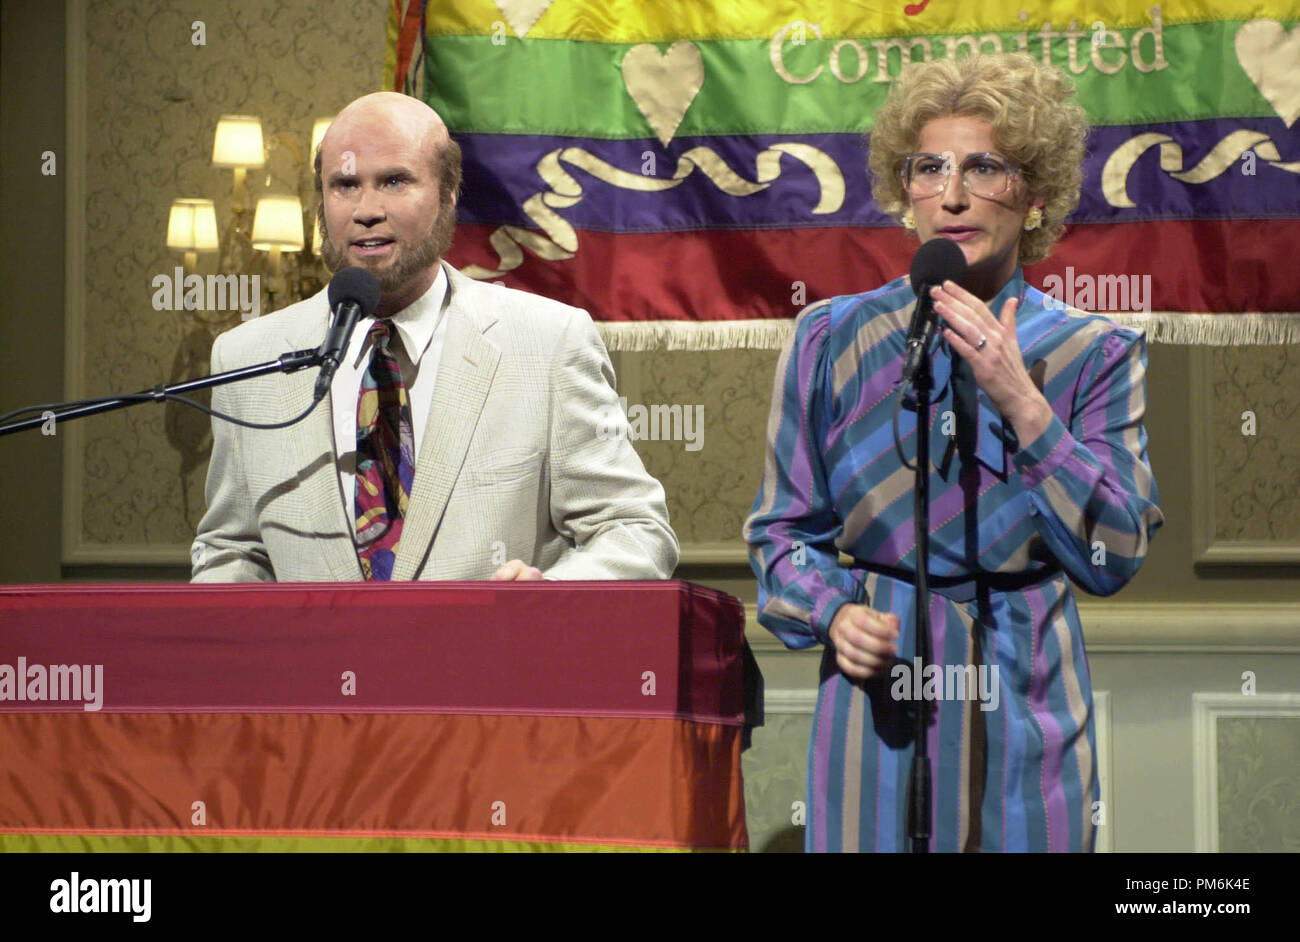 Film Still / Publicity Still from "Saturday Night Live" Ana Gasteyer, Will Ferrell  circa 2001 Photo credit: Mary Ellen Matthews   File Reference # 30847489THA  For Editorial Use Only -  All Rights Reserved Stock Photo